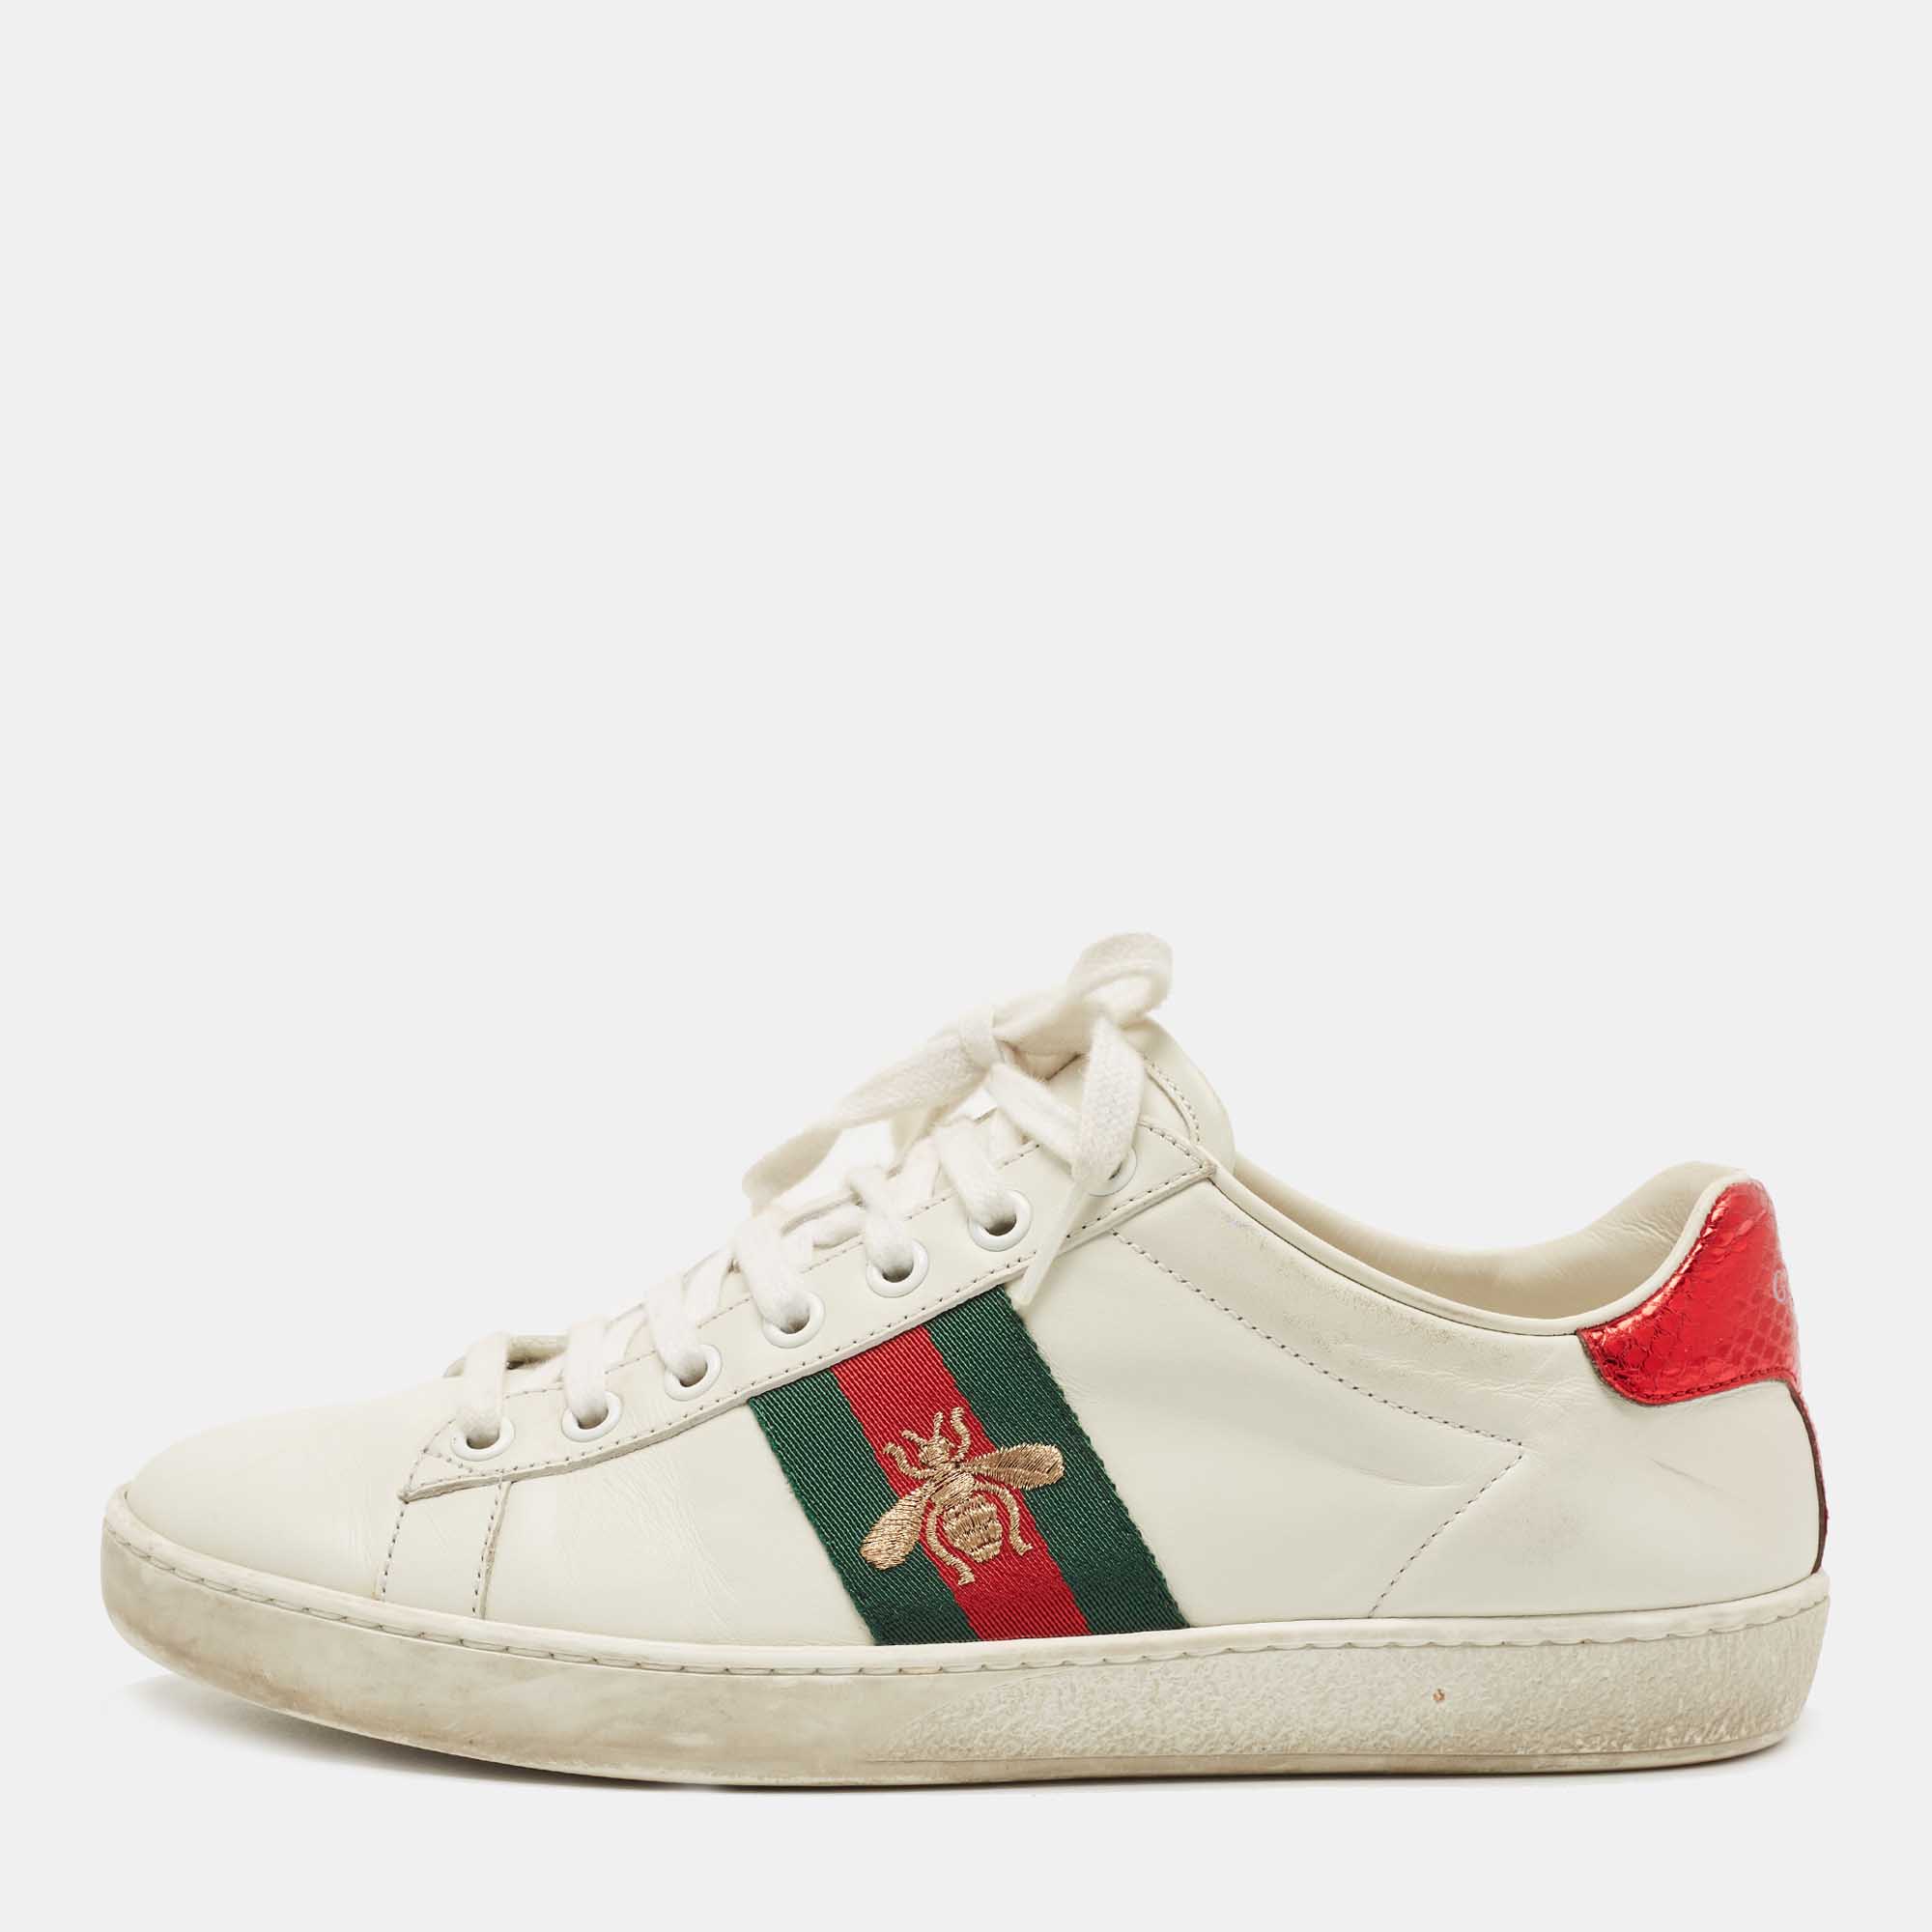 Gucci White Leather And Python Embossed Leather Ace Bee Web Low Top Sneakers Size 37